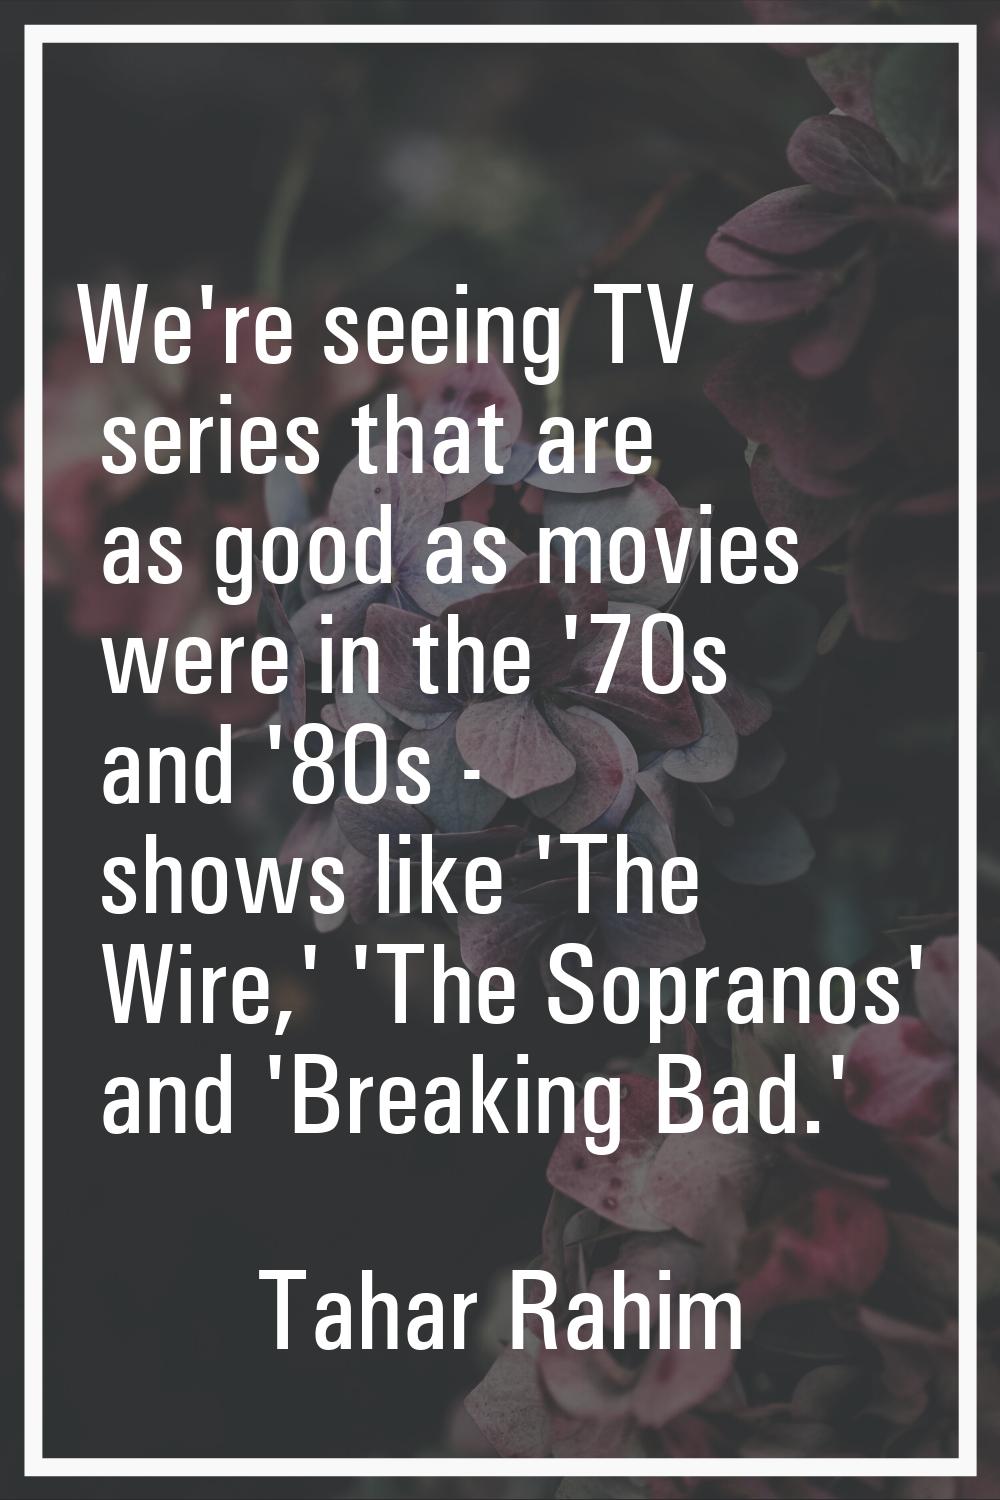 We're seeing TV series that are as good as movies were in the '70s and '80s - shows like 'The Wire,